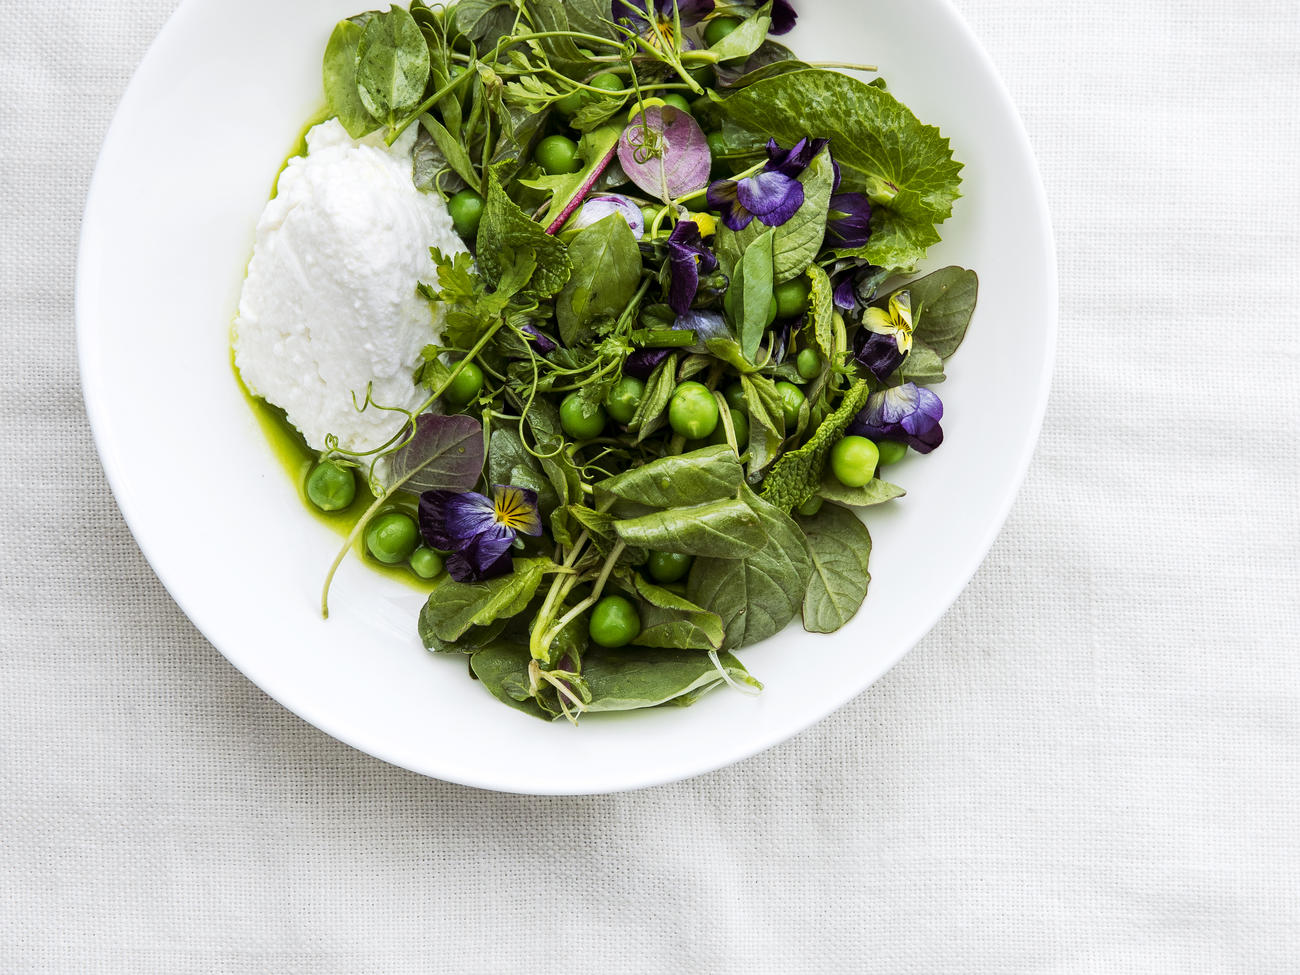 11 Salad Recipes That Put the Taste of Spring Right onto Your Plate